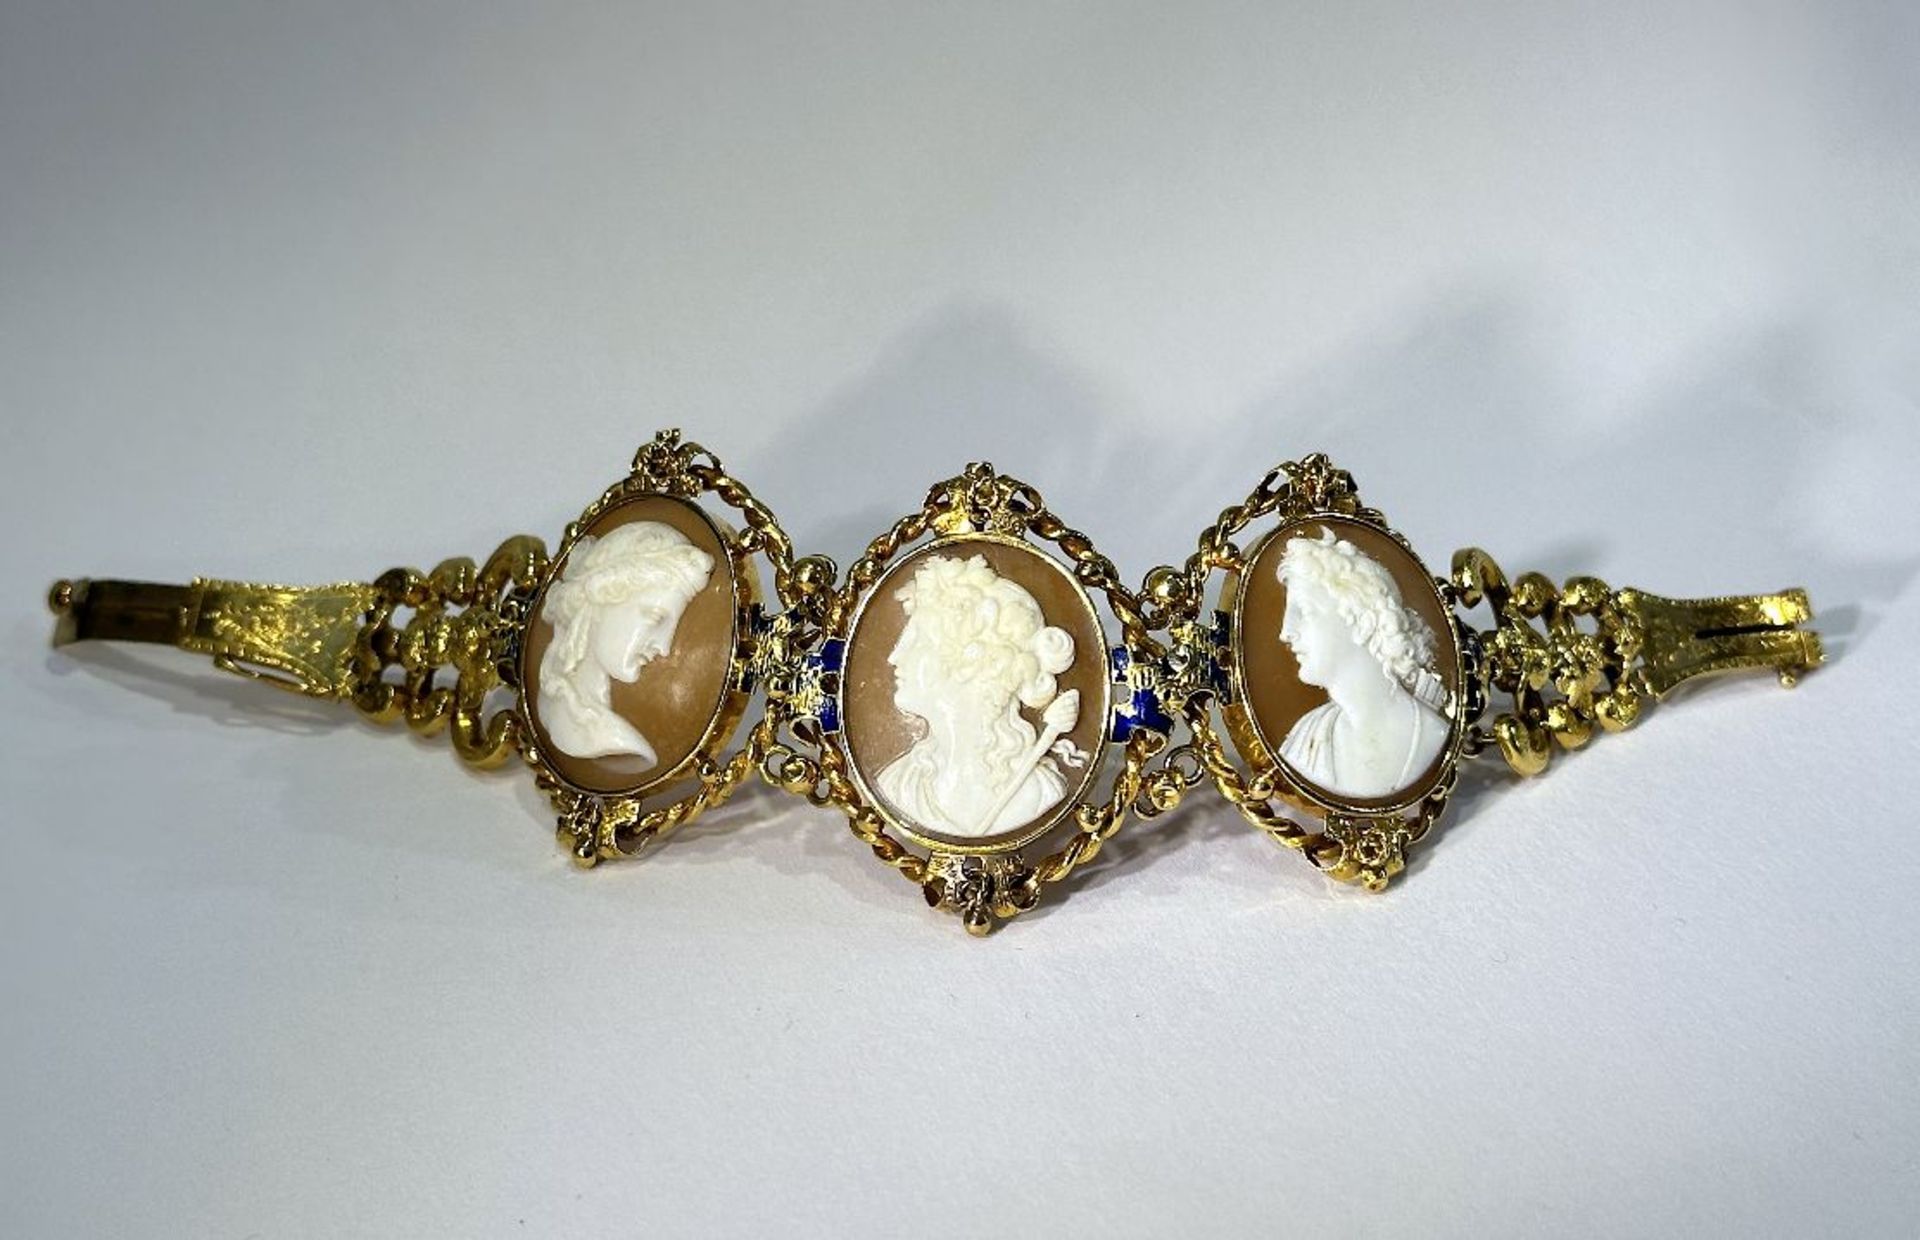 Louis-Philippe gold bracelet with three cameos - Image 2 of 6